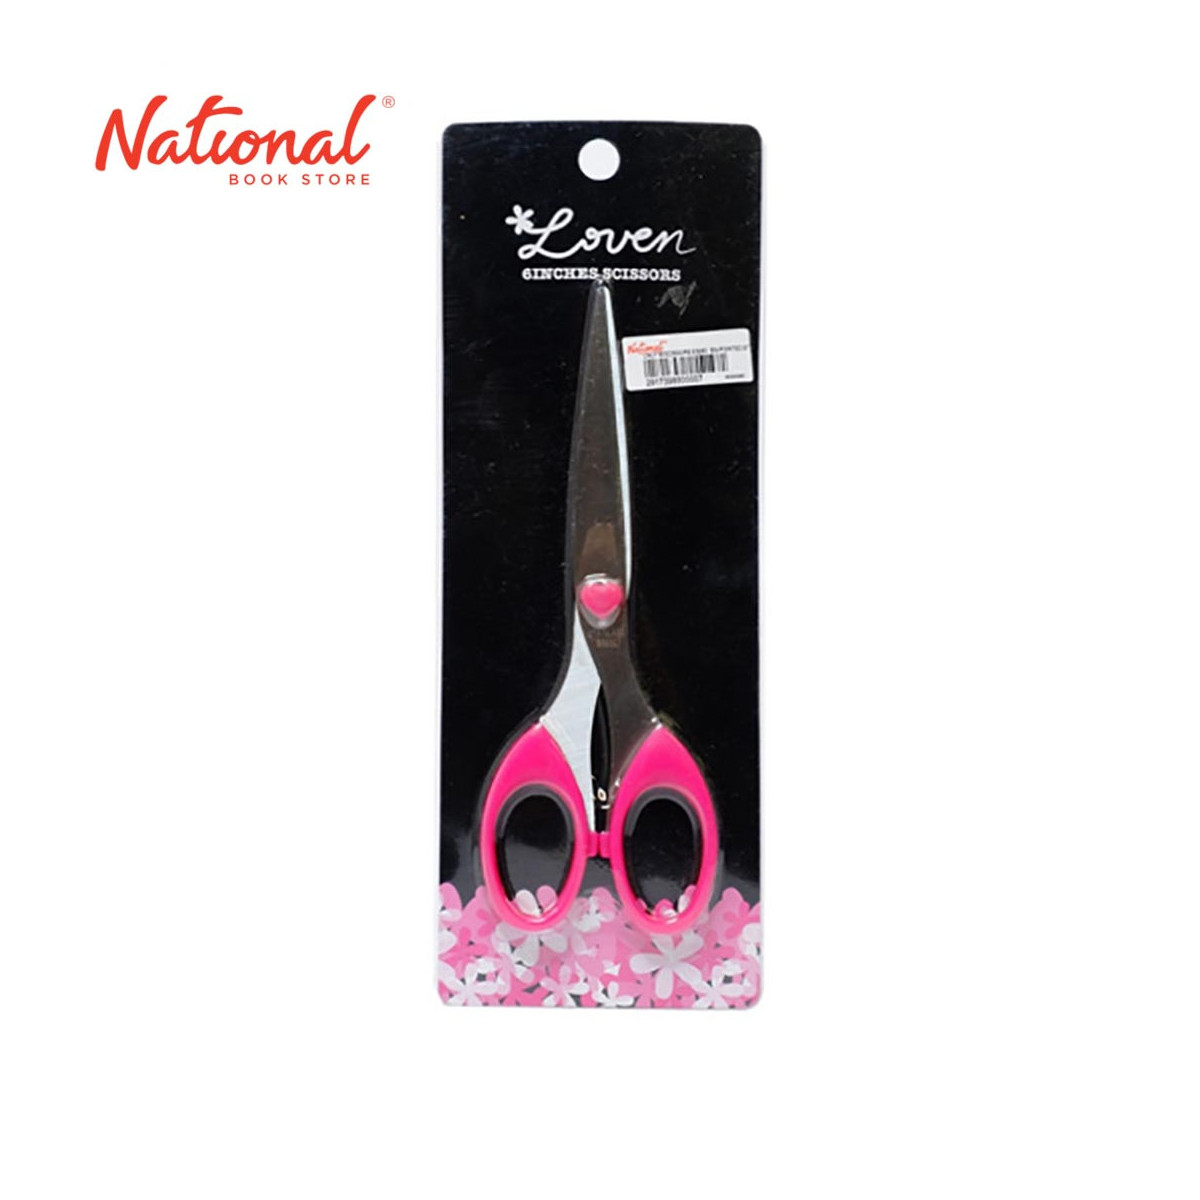 LONG LIFE MULTI-PURPOSE SCISSORS S3260 6IN POINTED STAINLESS